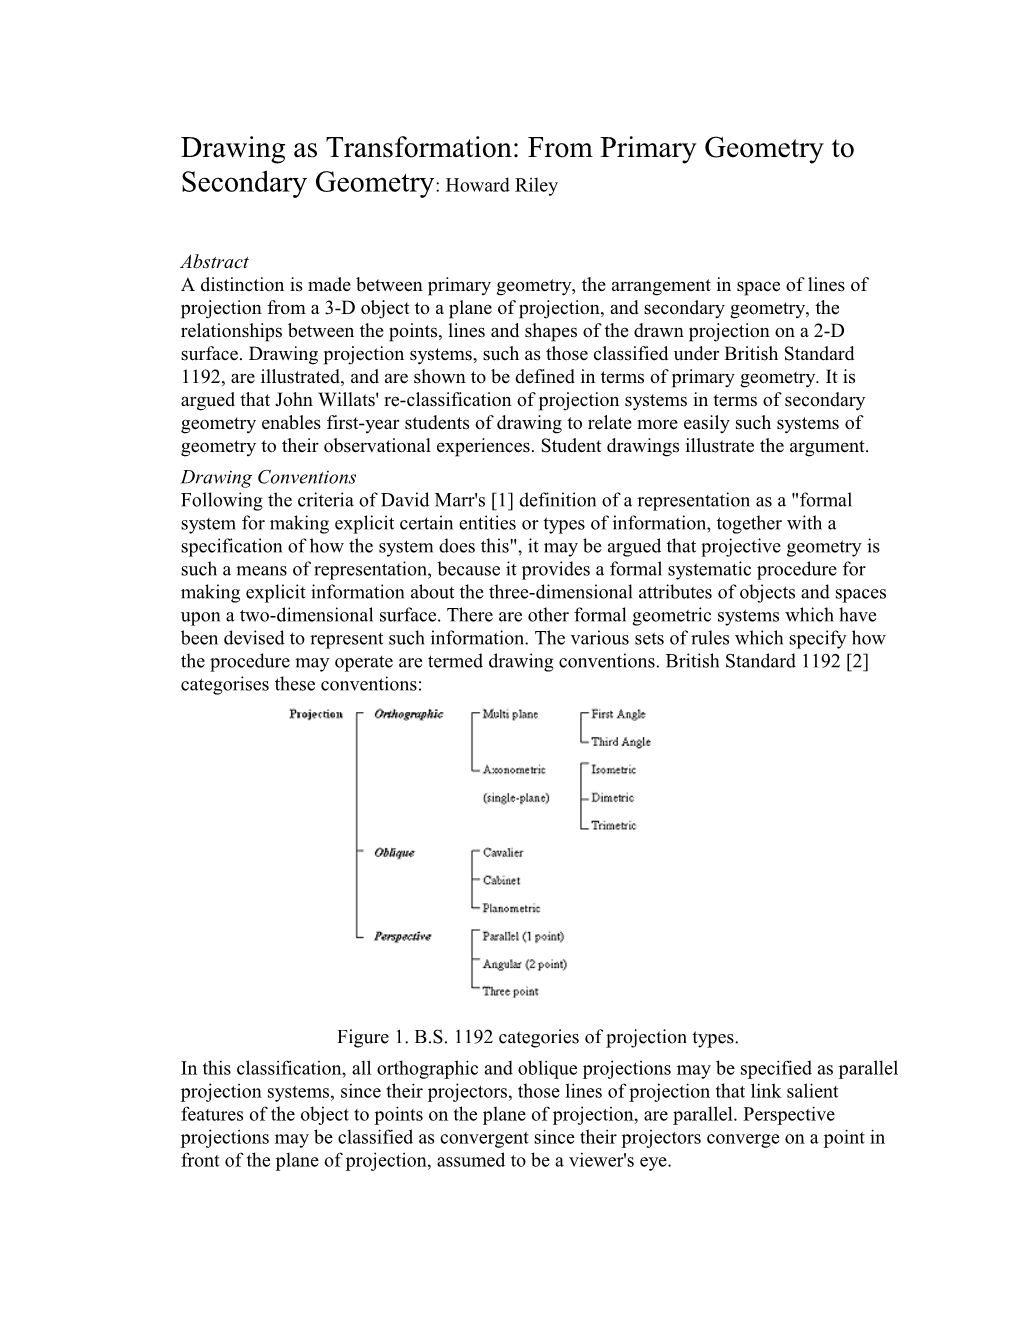 Drawing As Transformation: from Primary Geometry to Secondary Geometry: Howard Riley